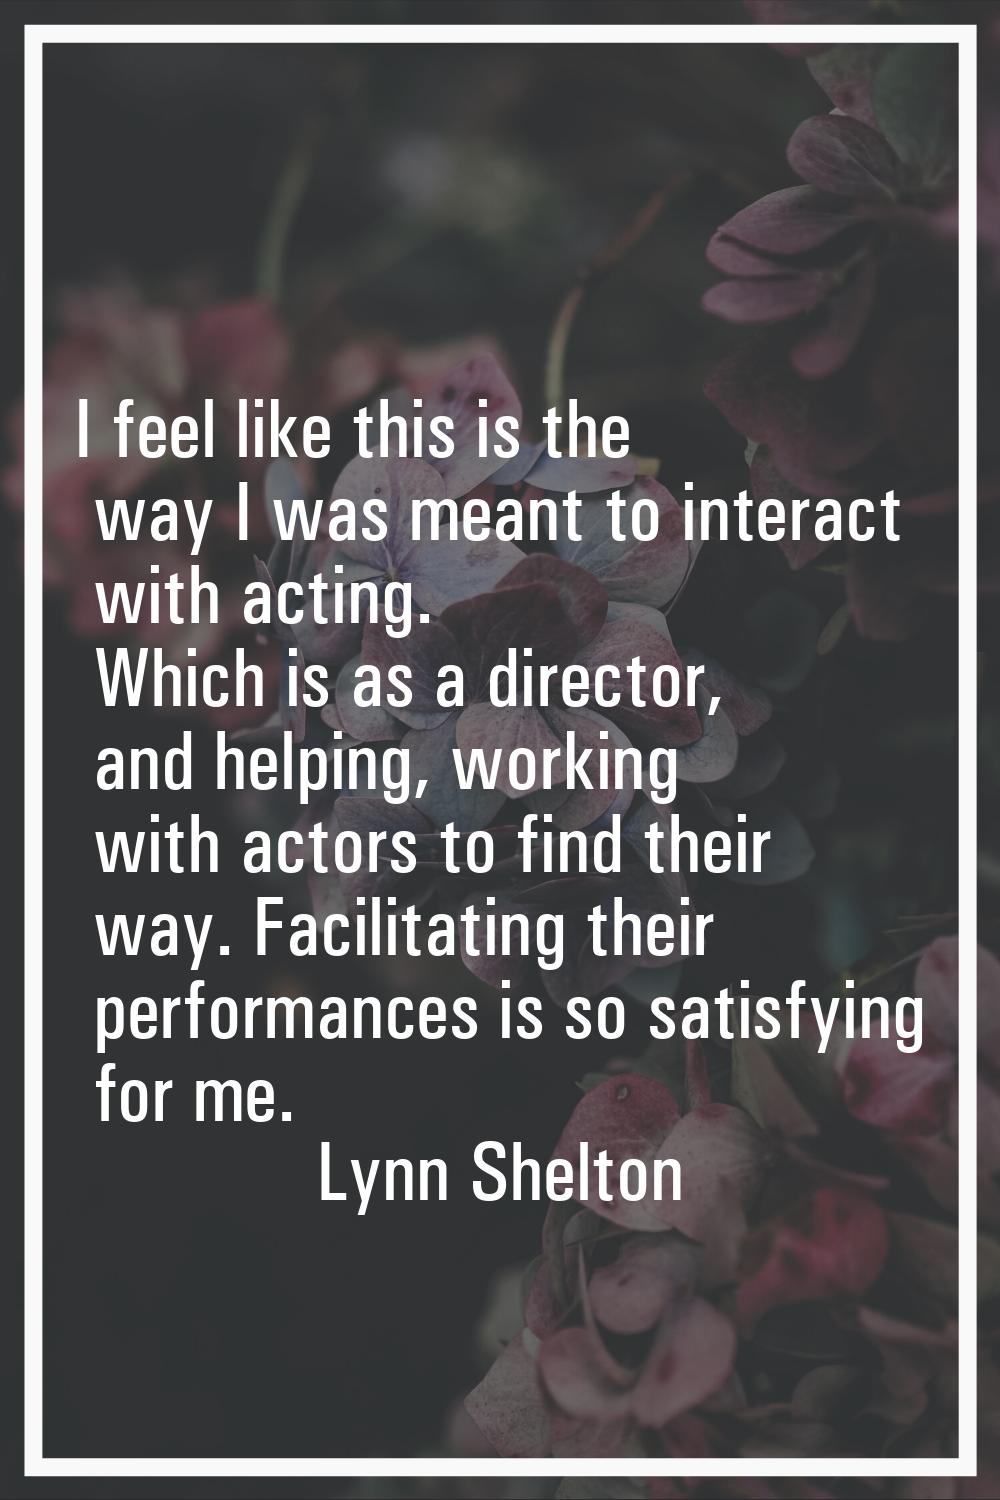 I feel like this is the way I was meant to interact with acting. Which is as a director, and helpin